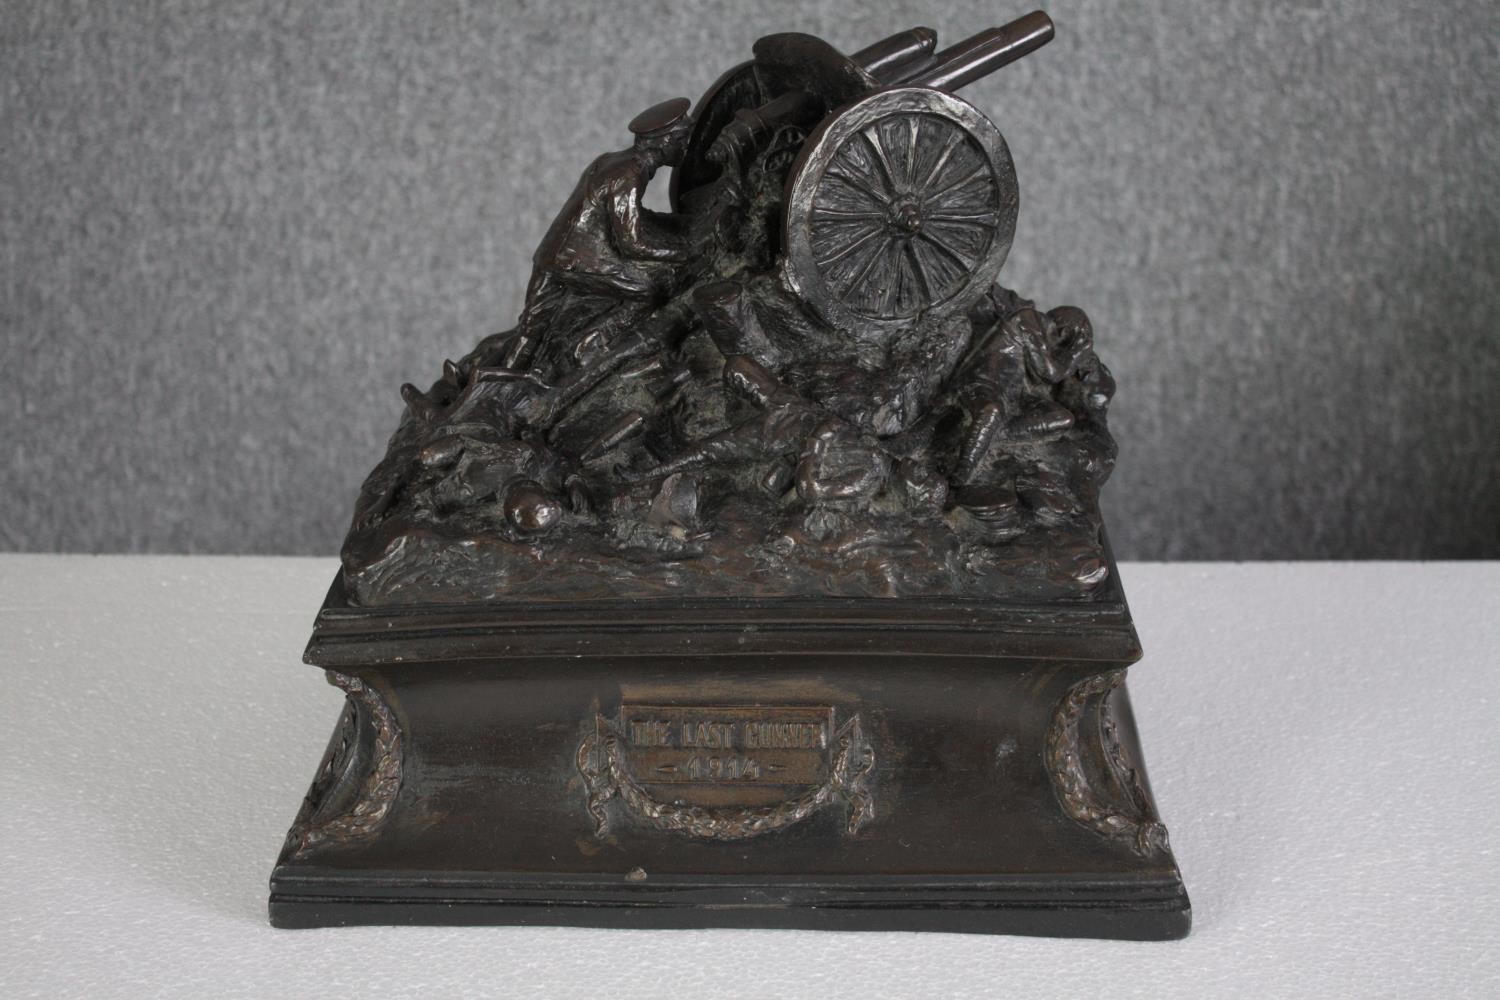 Vincent Gattai (active 1915). Titled on the plinth, 'The Last Gunner'. A lone artilleryman is - Image 2 of 10